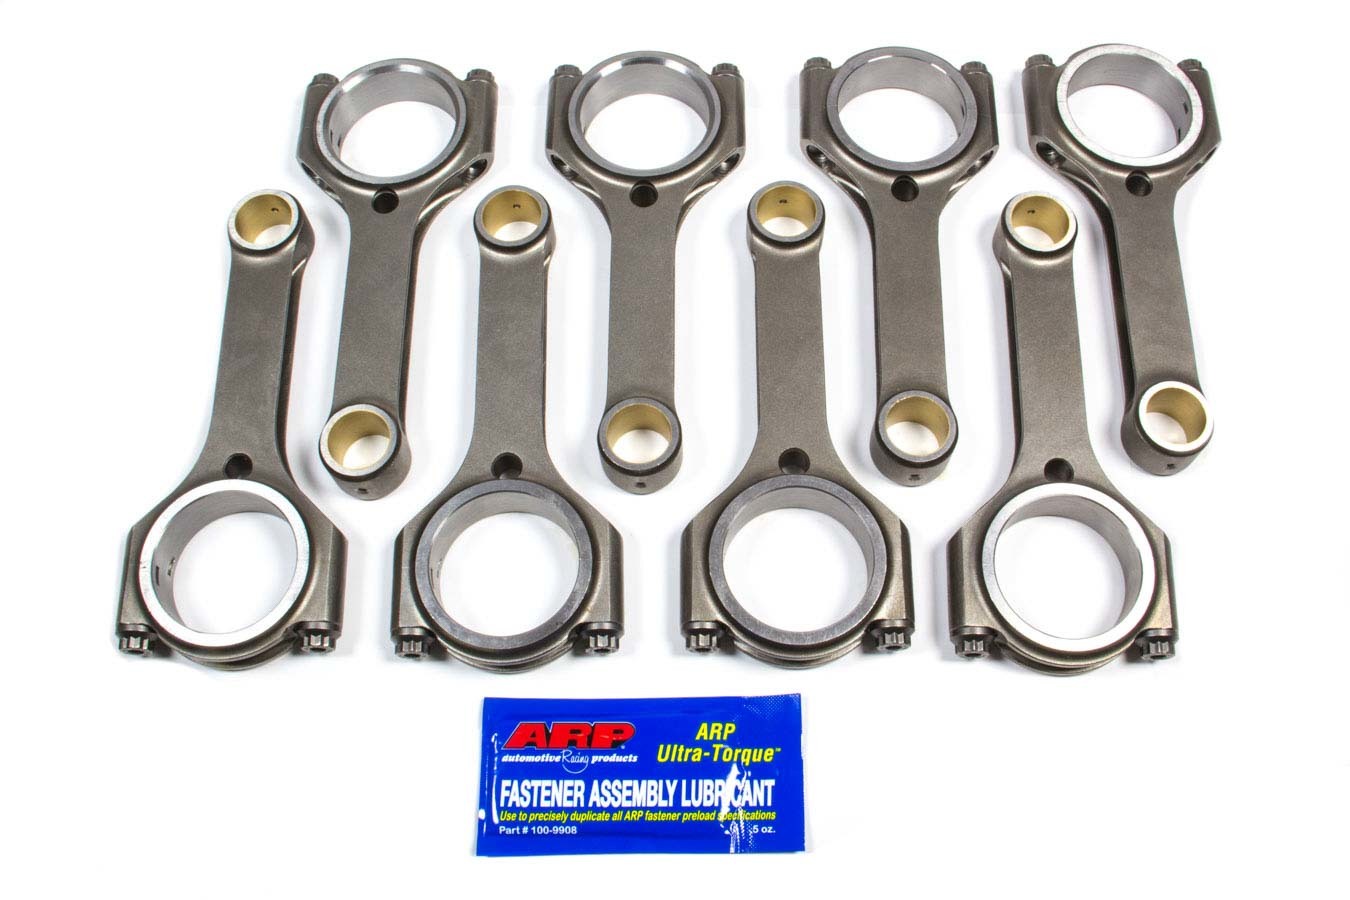 Scat 2-350-6000-2000-QLS Connecting Rod, Ultra Q-Lite, H Beam, 6.000 in Long, Bushed, 7/16 in Cap Screws, ARP8740, Forged Steel, Small Block Chevy, Set of 8